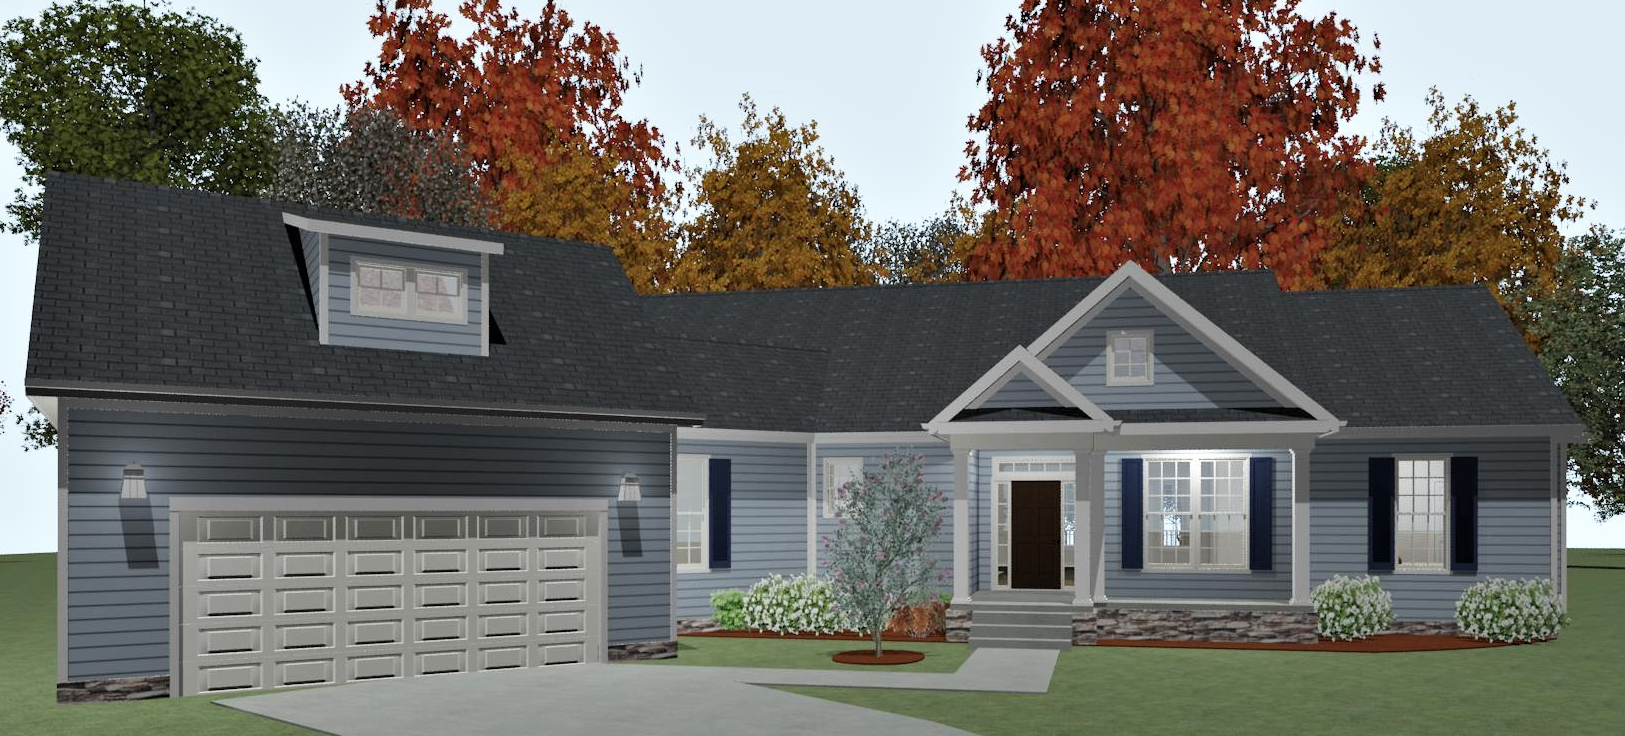 Entertain & Live: Featured Home Plan – The Berkeley